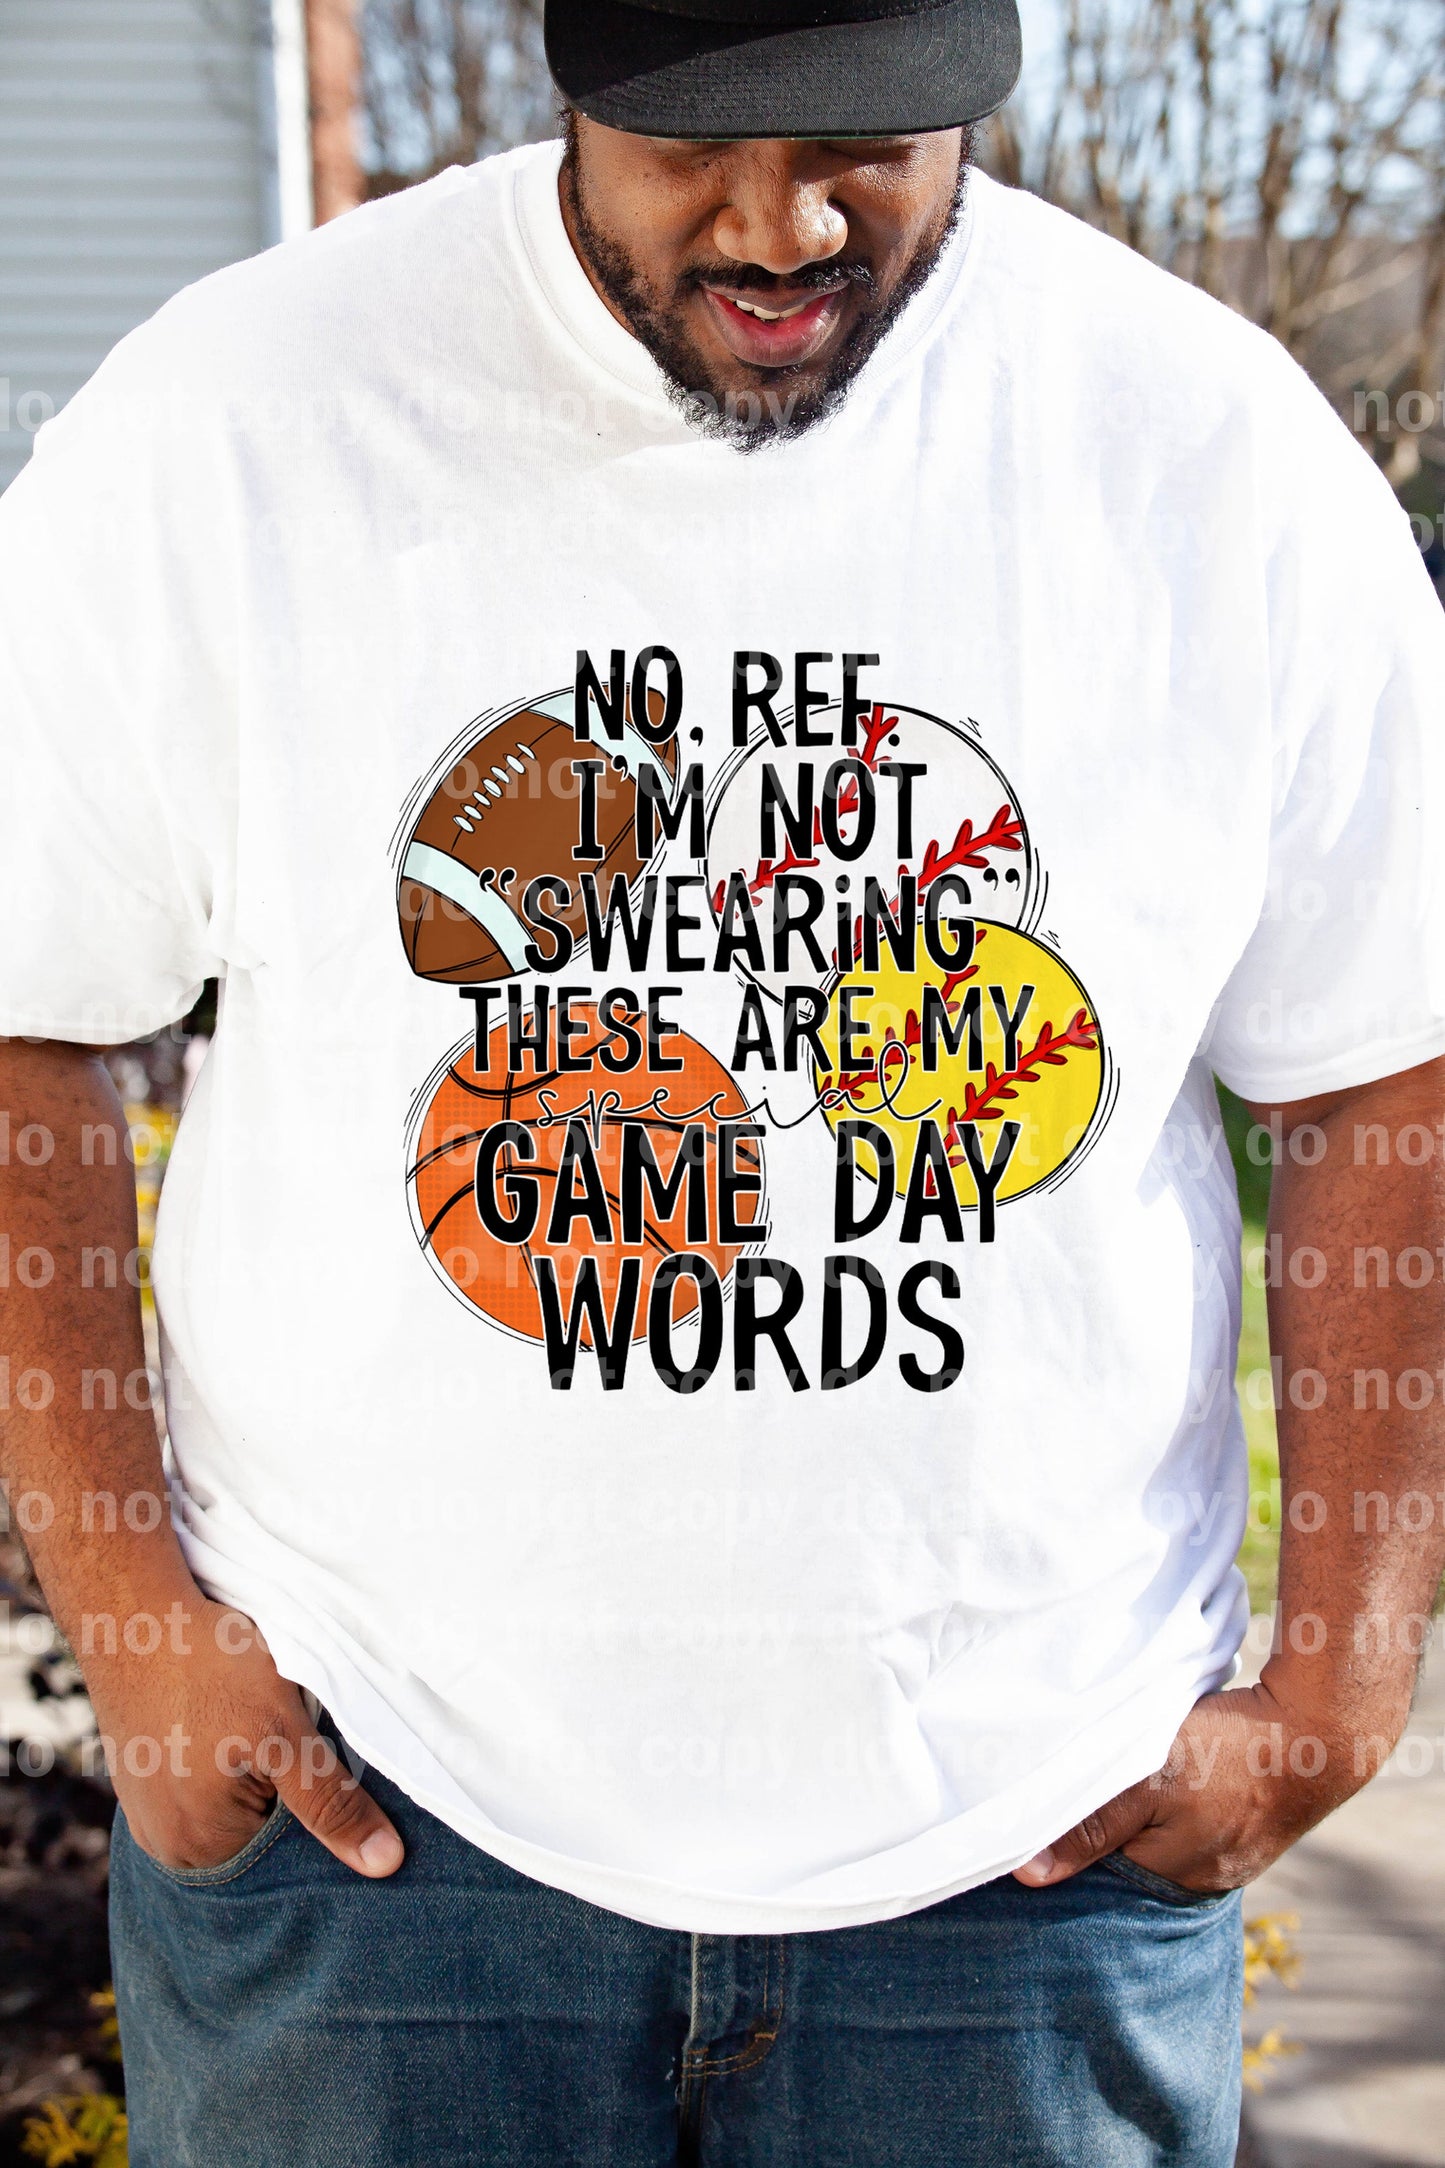 No Ref I'm Not Swearing These Are My Special Game Day Words Multisport Dream Print or Sublimation Print